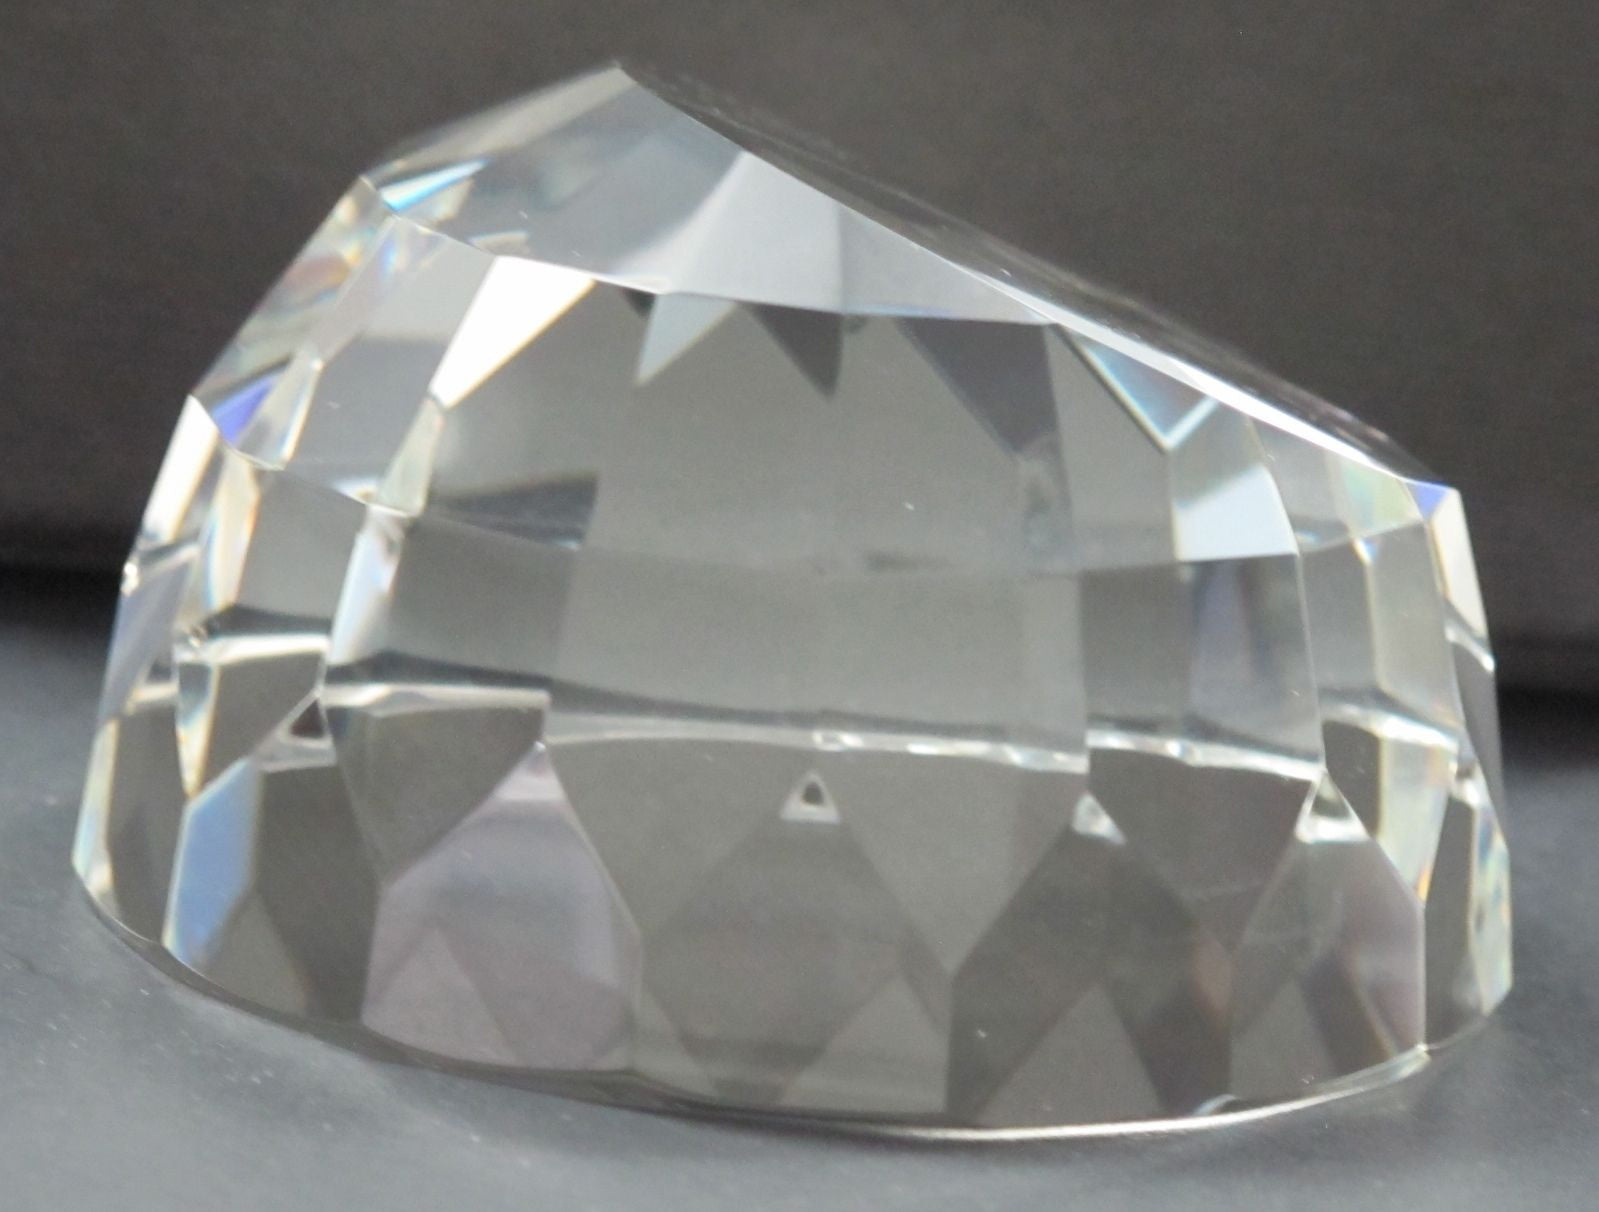 Half Globe pattern glass faceted paperweight, - O'Rourke crystal awards & gifts abp cut glass